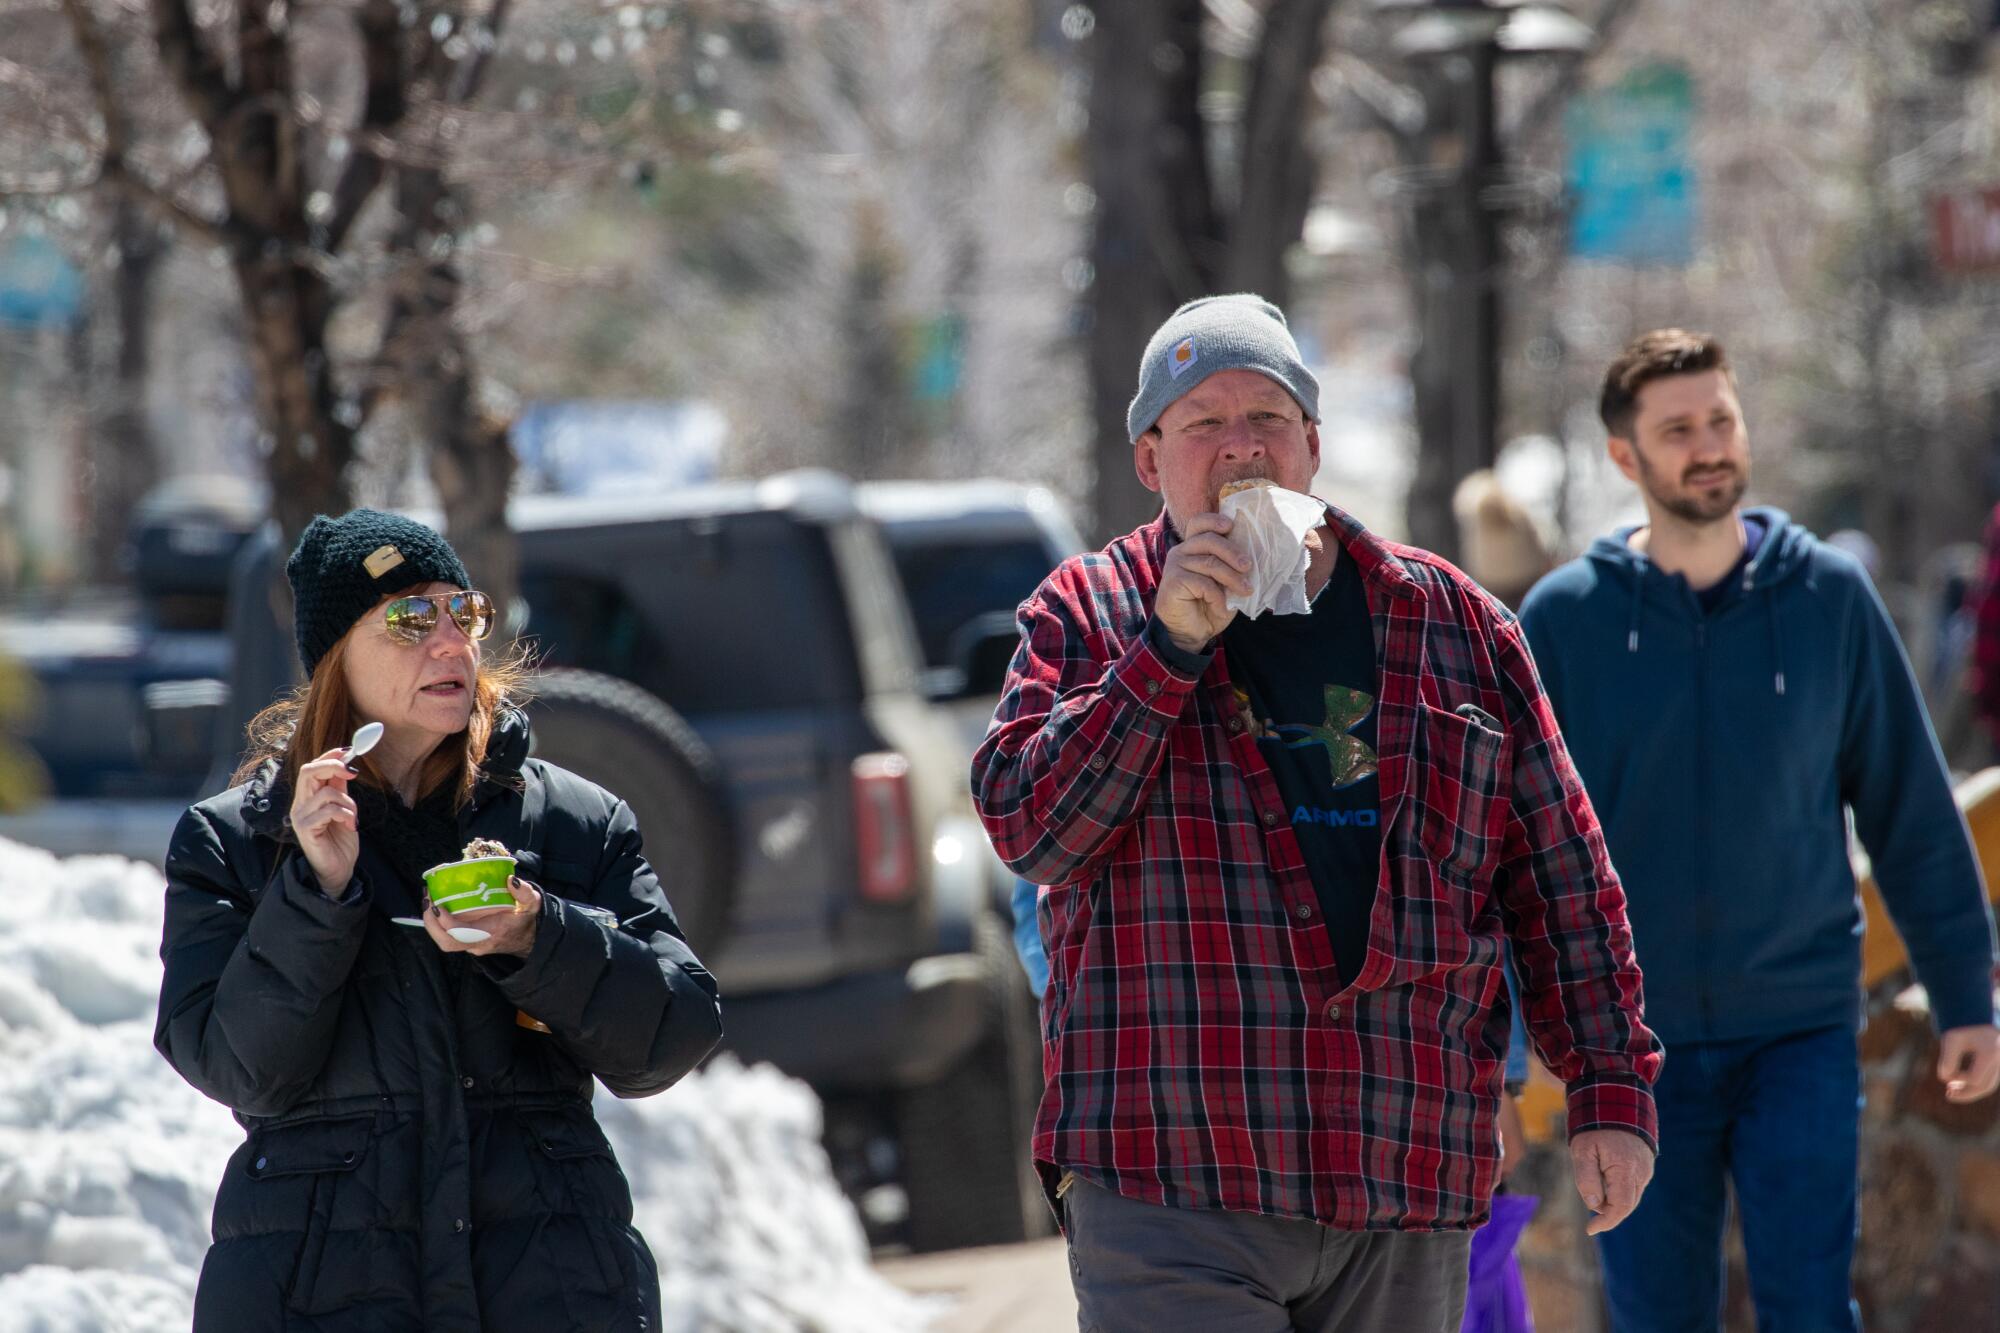 A woman and man eat ice cream while walking through the downtown district of Big Bear.